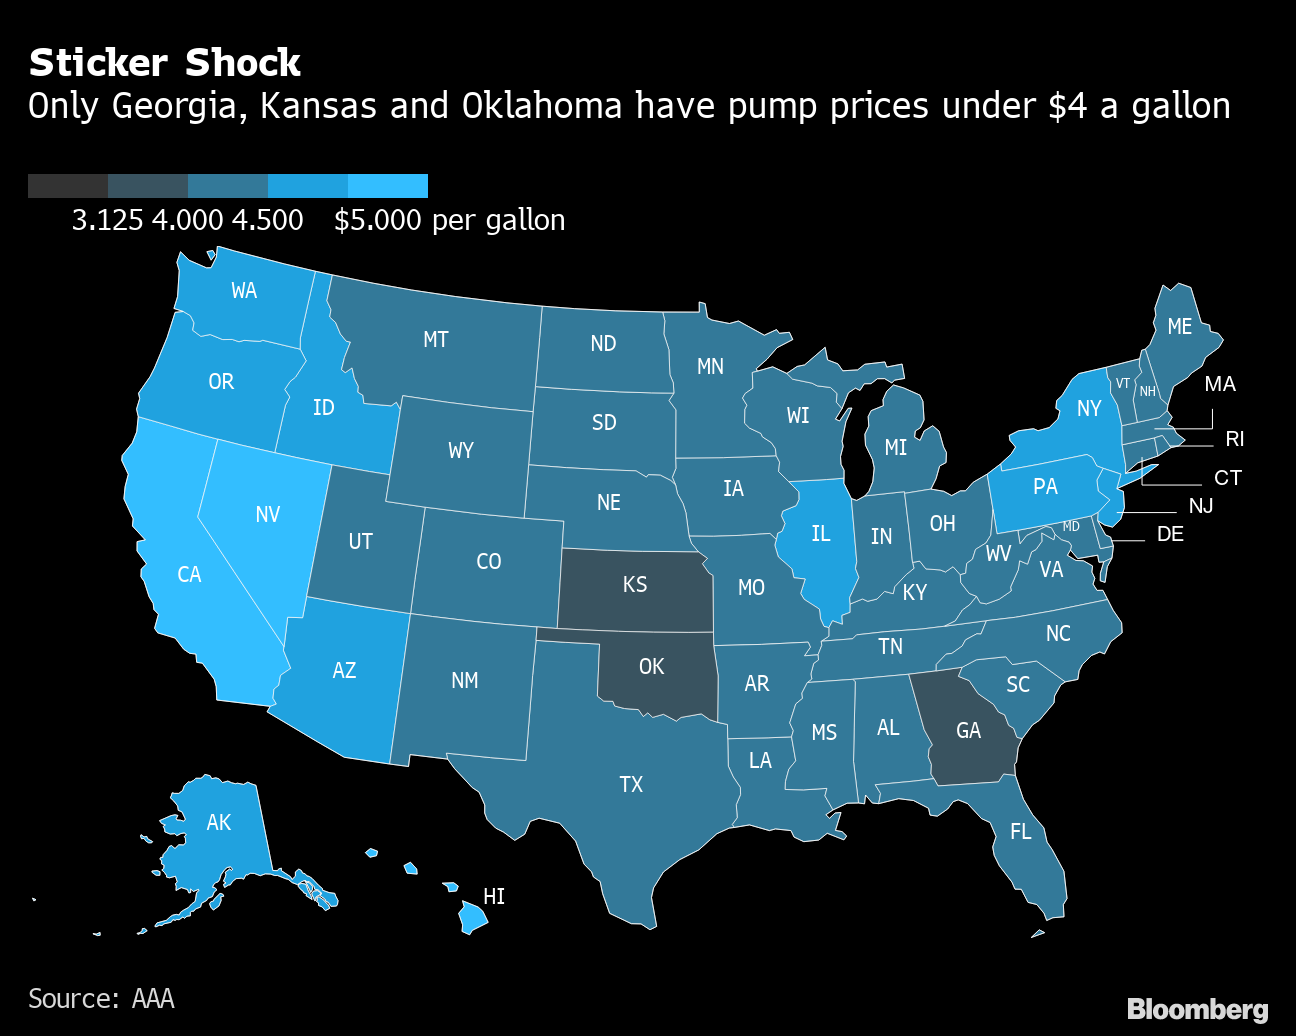 Sticker Shock | Only Georgia, Kansas and Oklahoma have pump prices under $4 a gallon